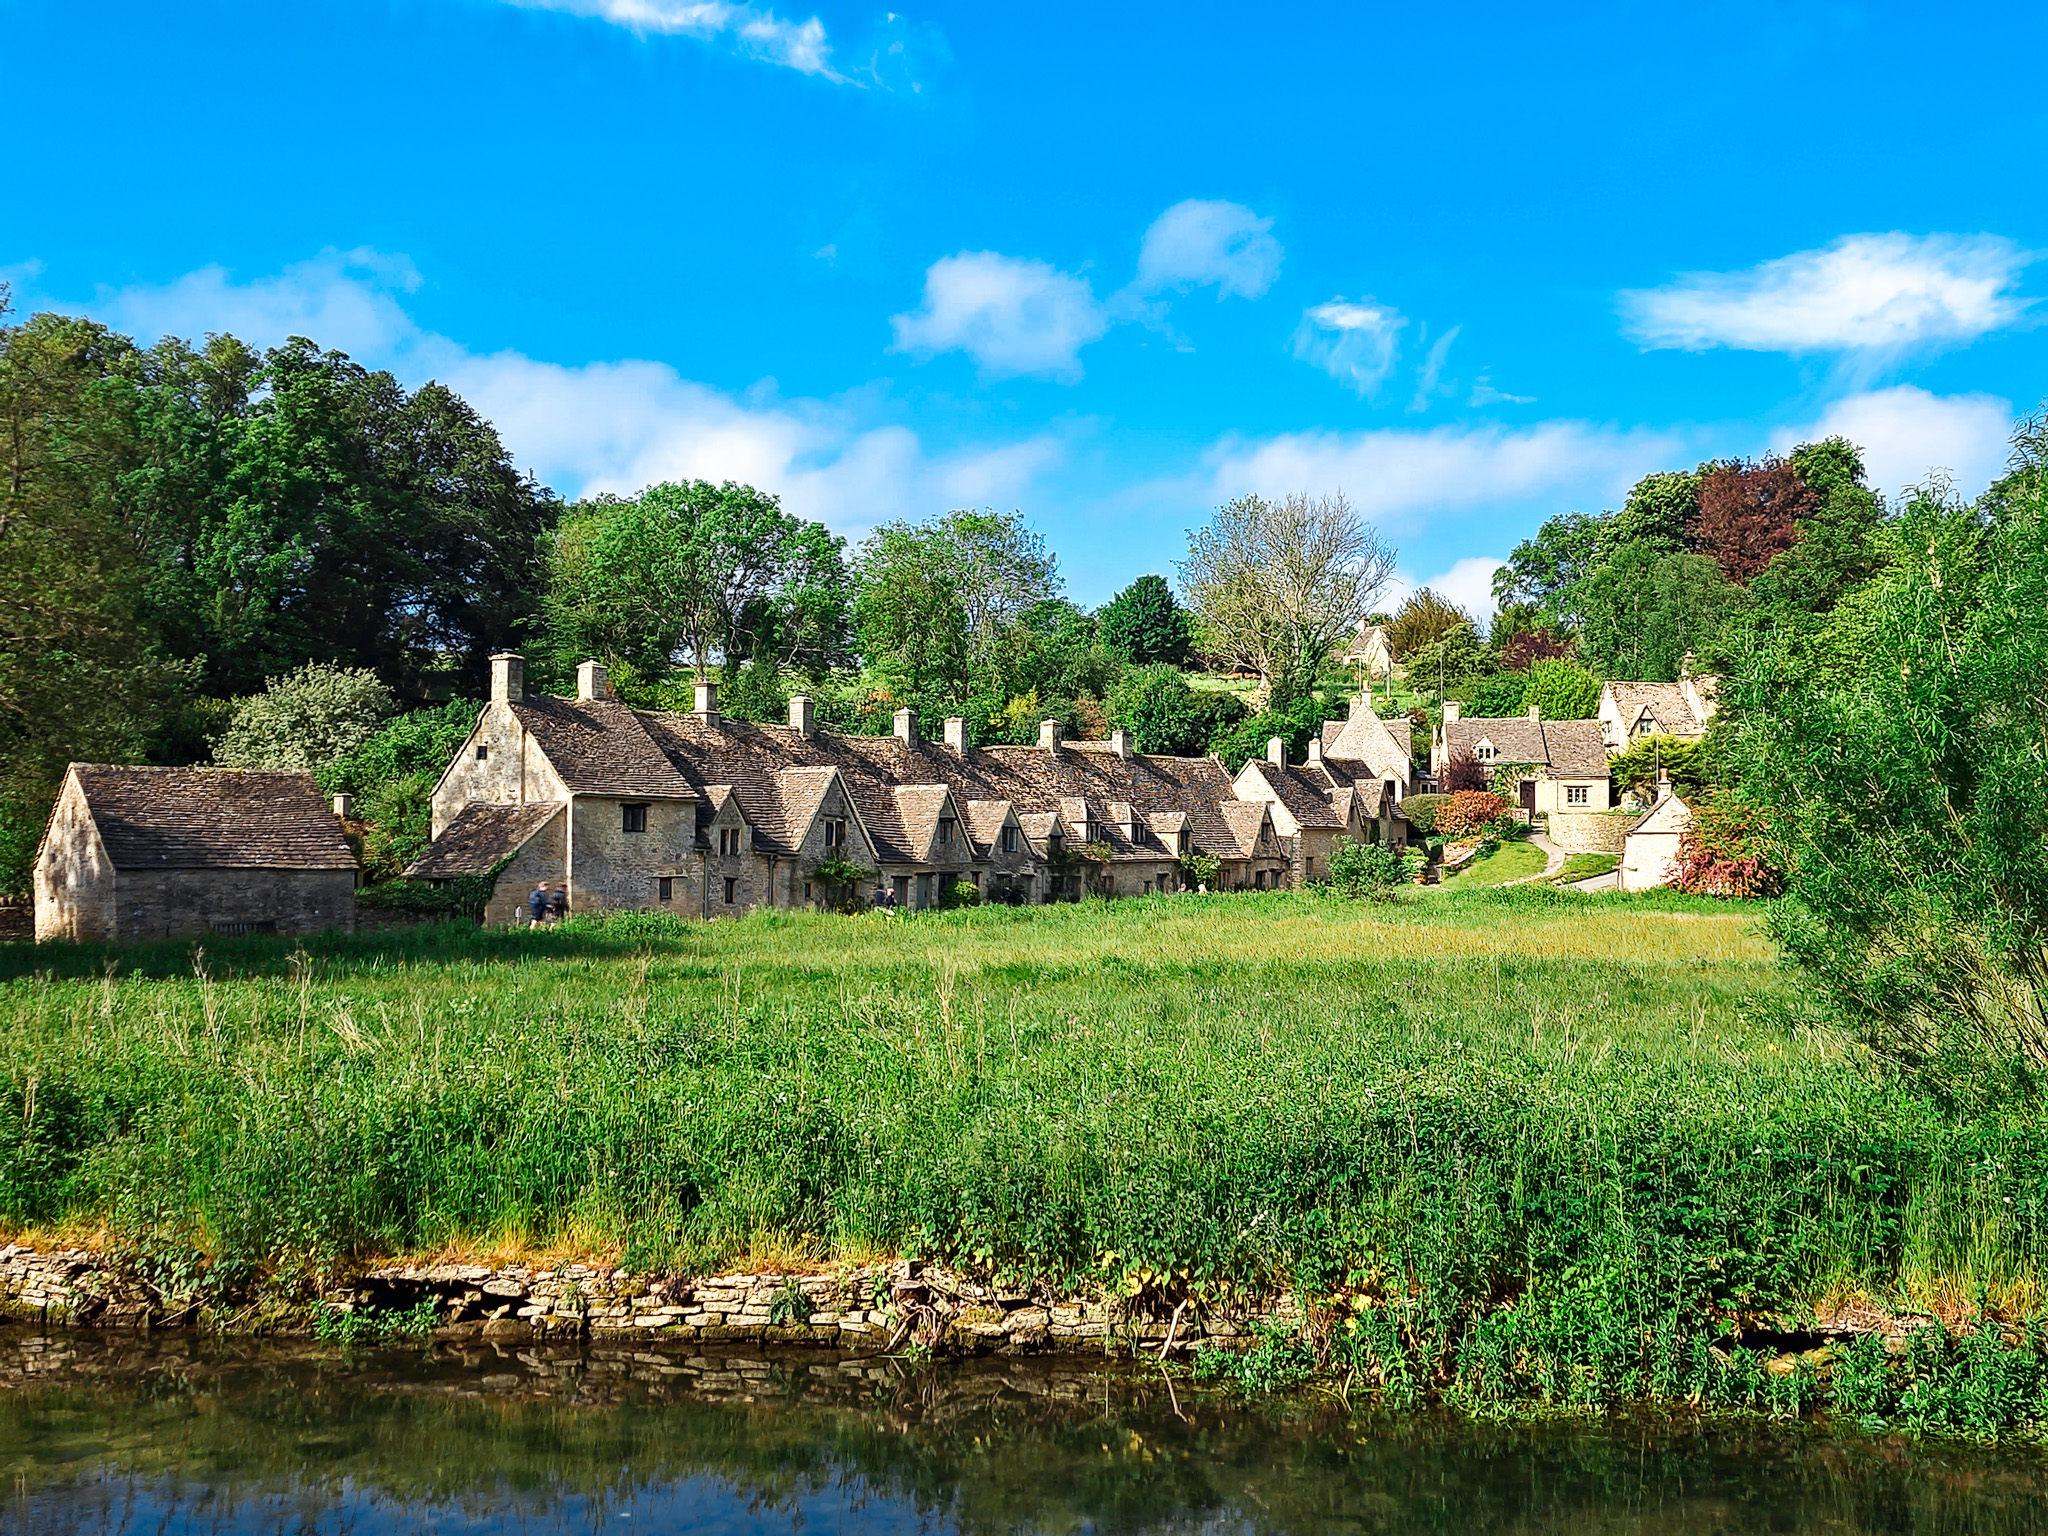 The Ultimate Guide to the 10 Best Villages in the Cotswolds